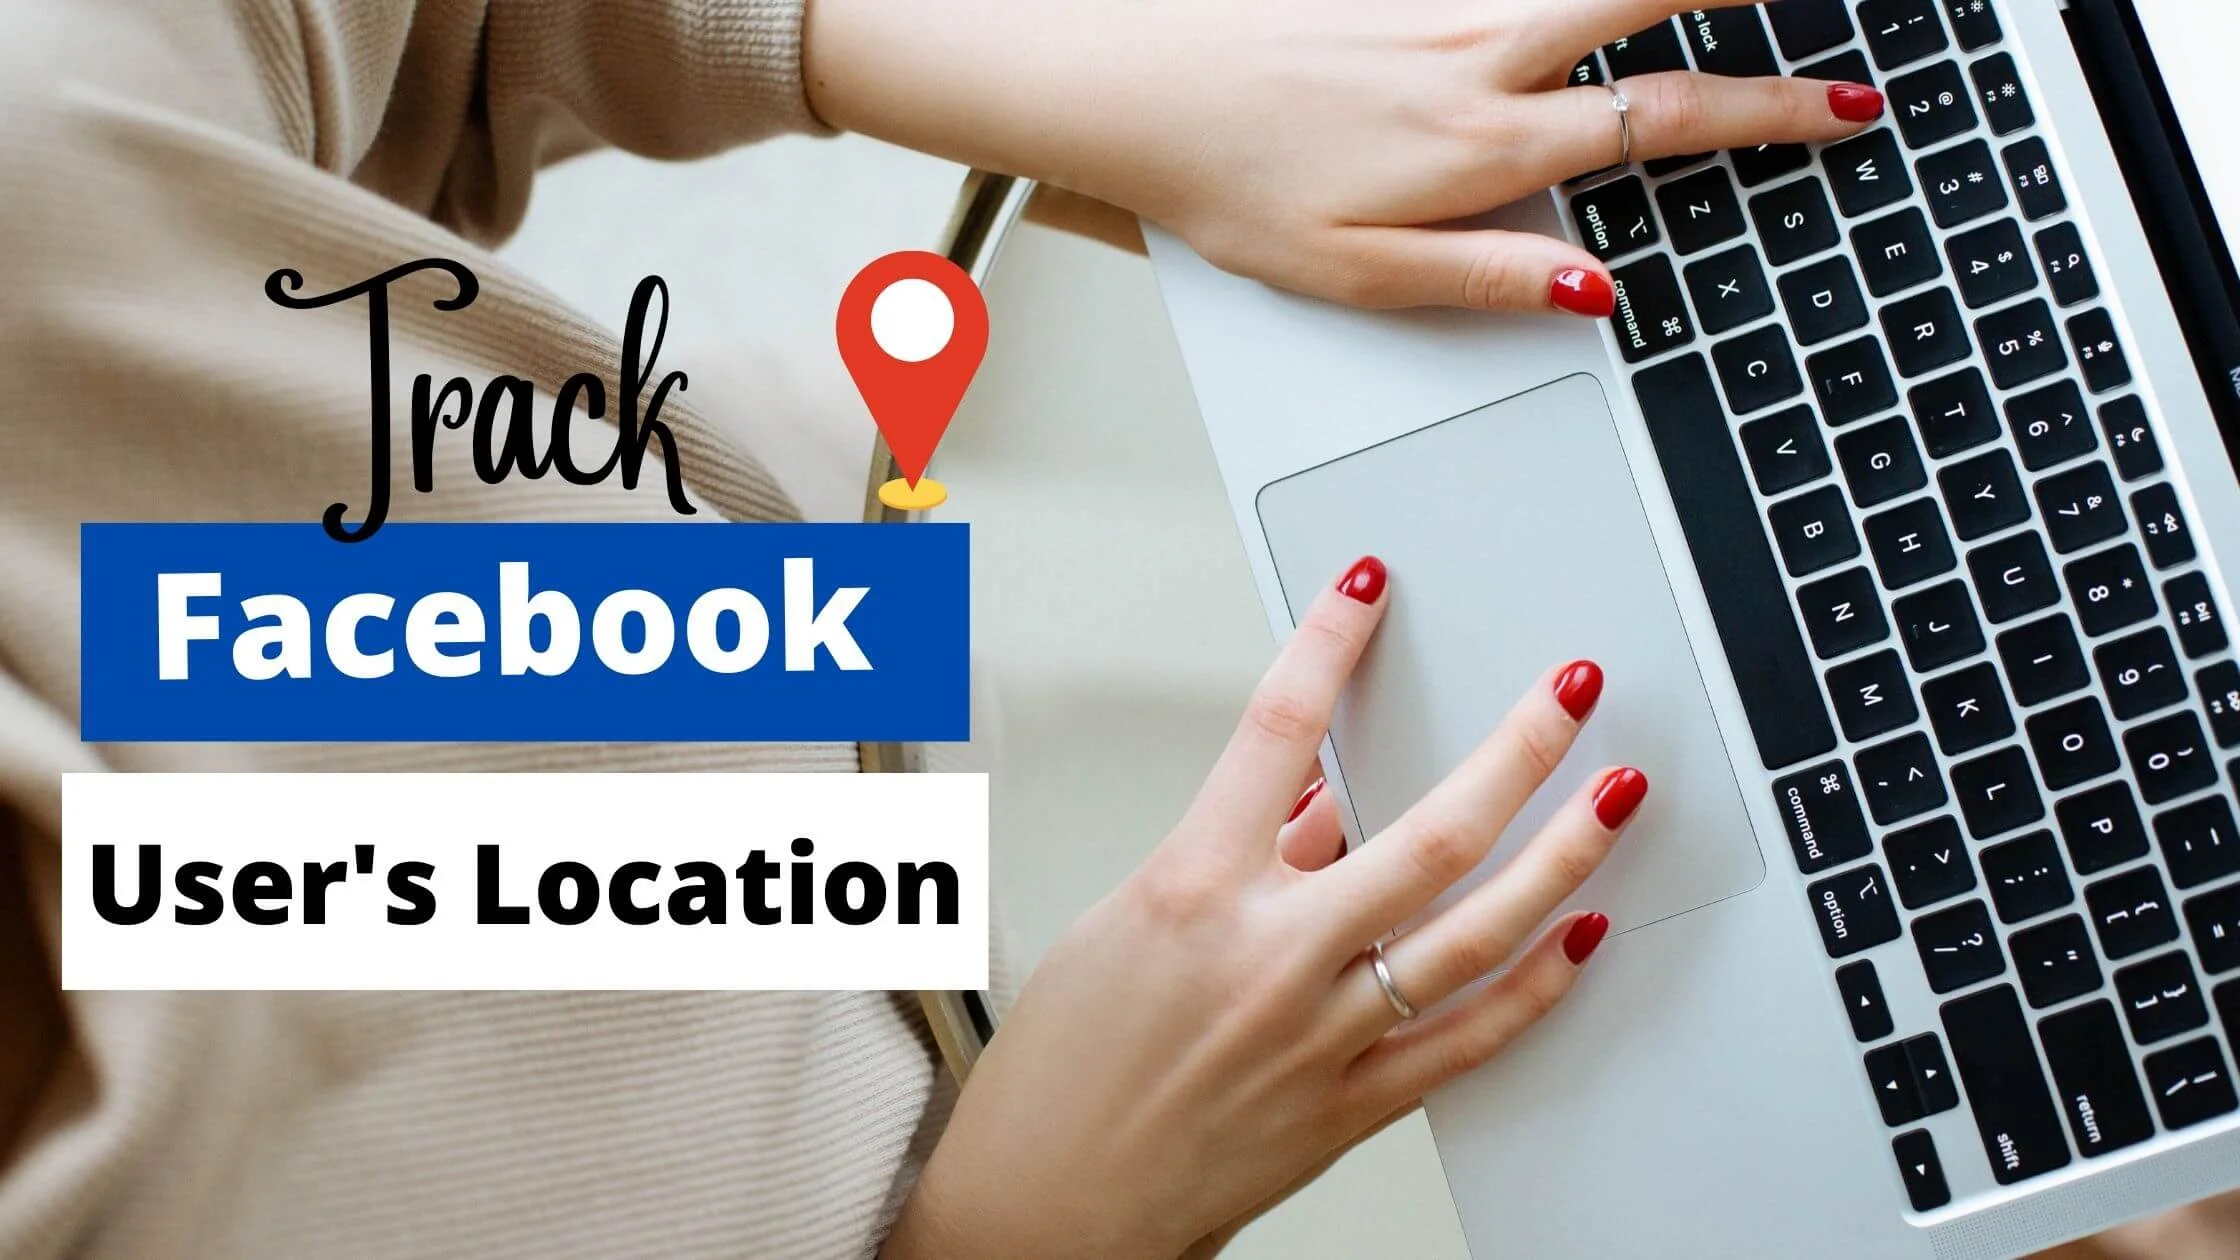 track the location of someone's Facebook account